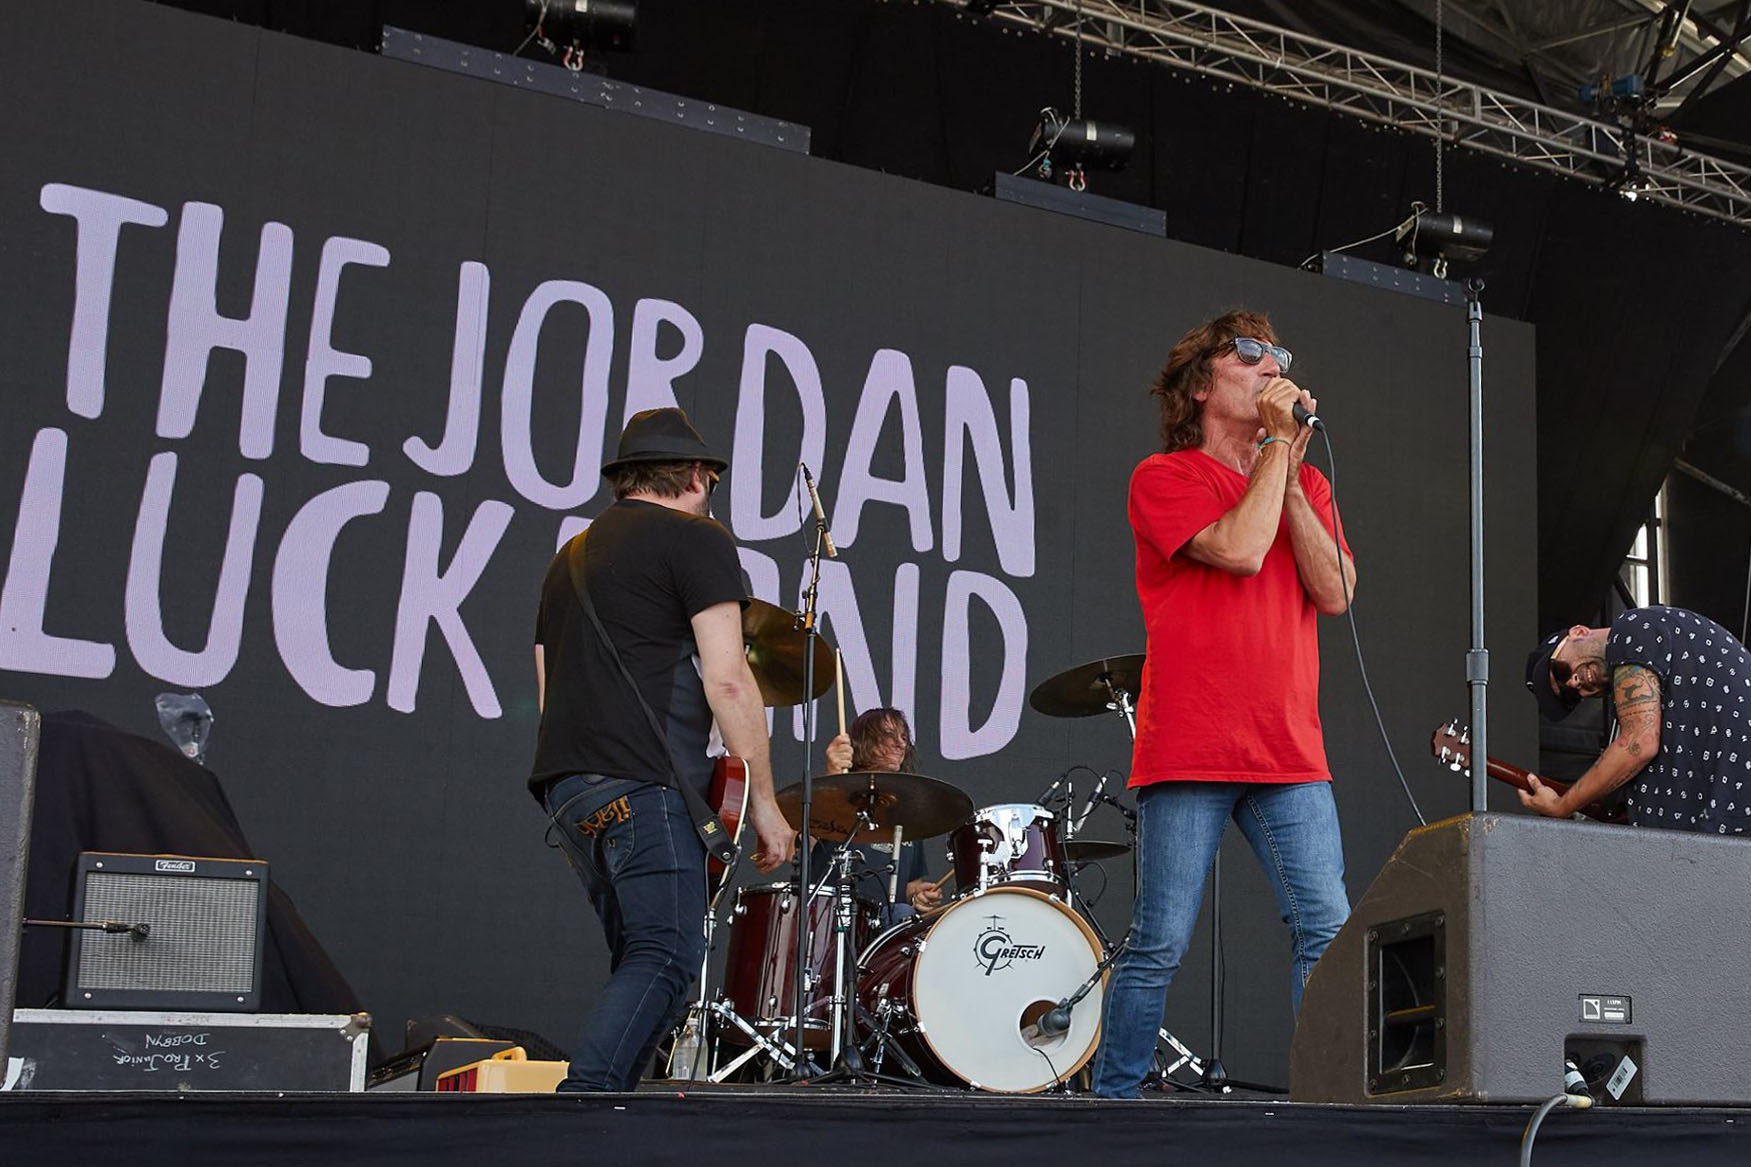 Jordan Luck Band and a stacked lineup of other New Zealand musicians will perform at Selwyn...